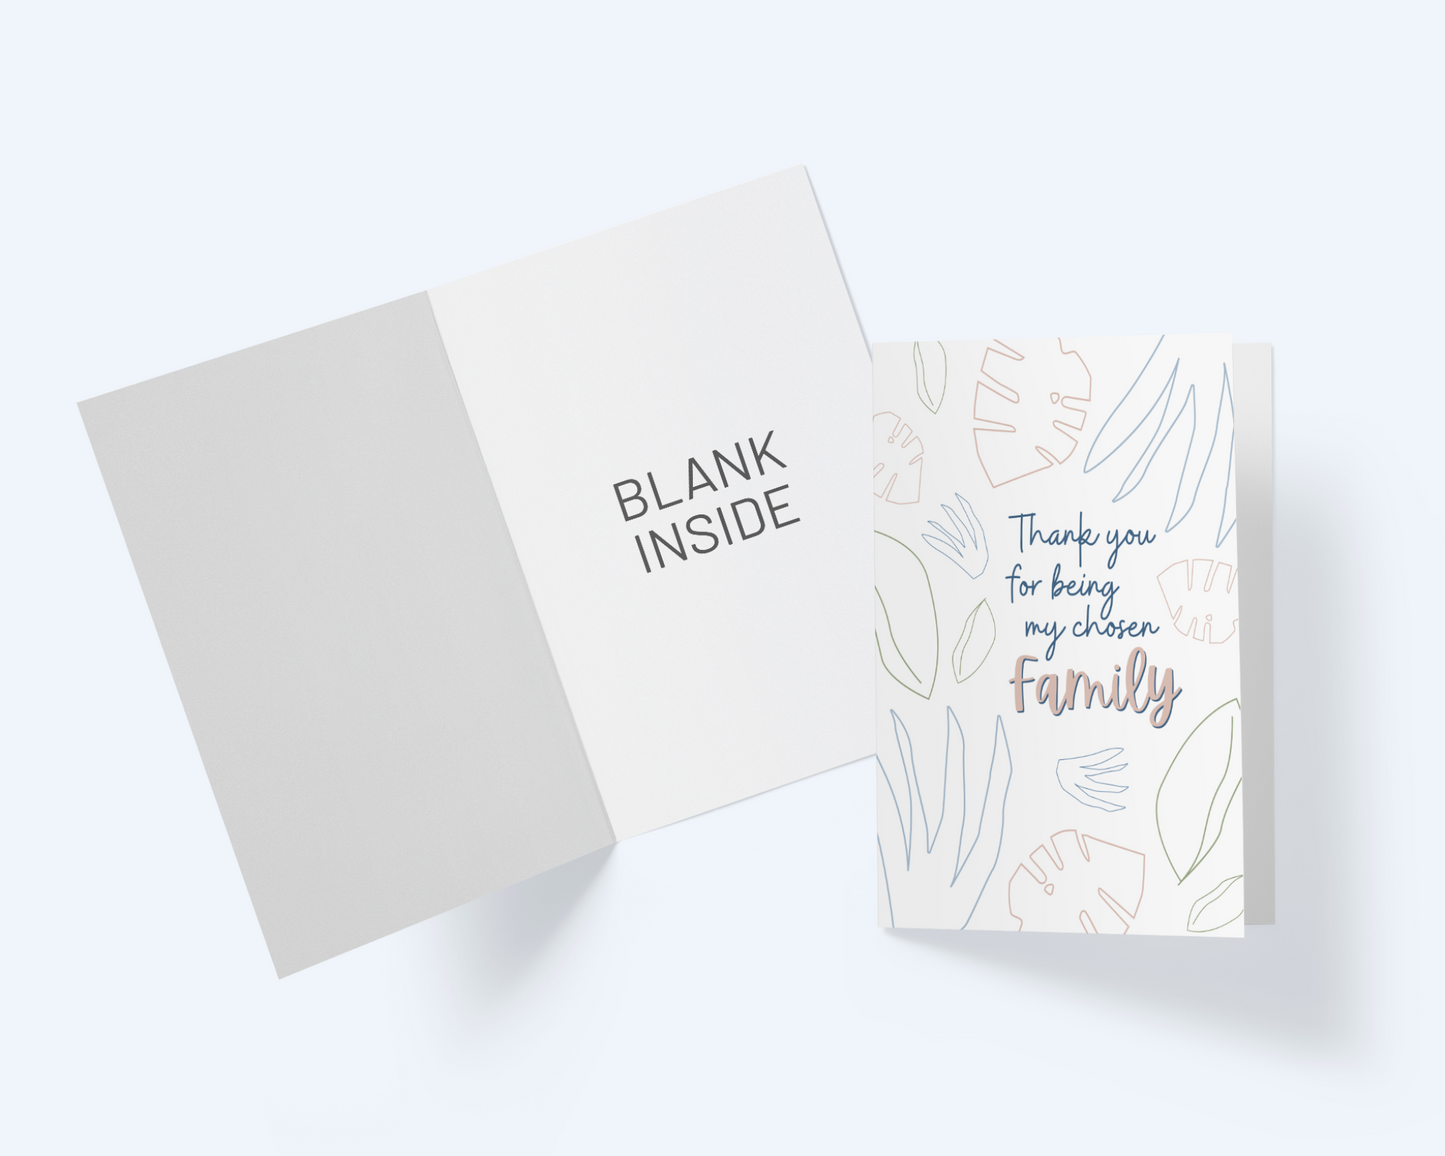 Thank You For Being My Chosen Family- Greeting Card - Chosen Family Note Card.